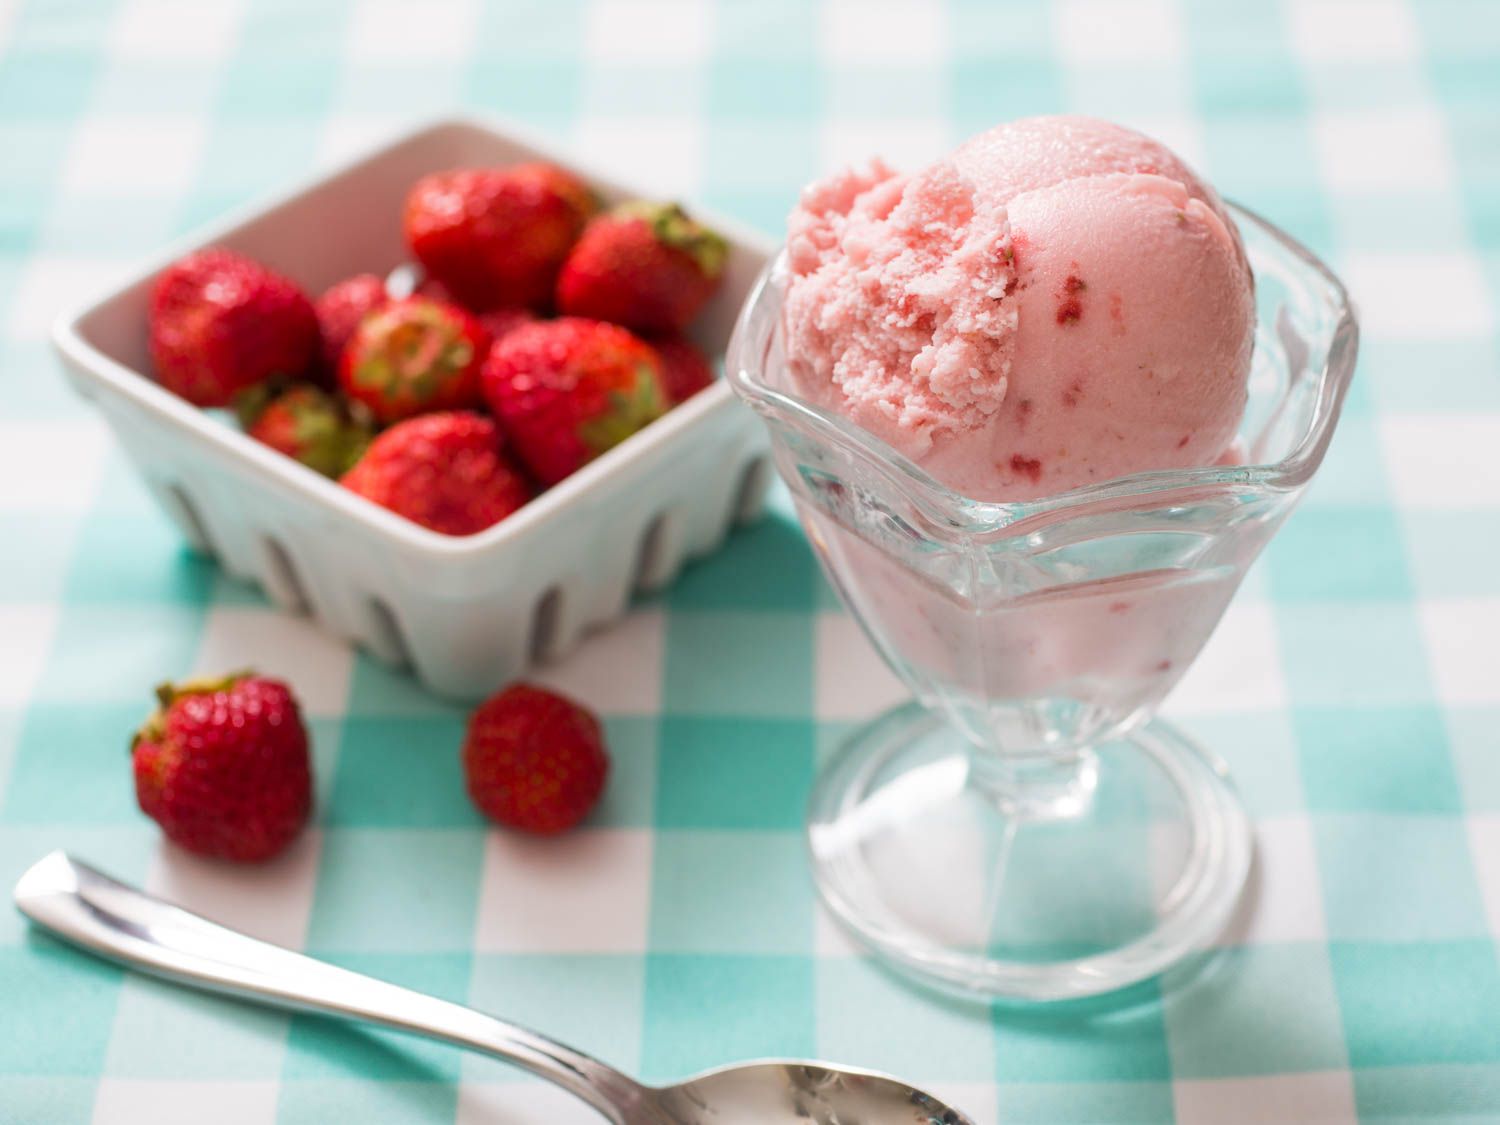 A scoop of strawberry ice cream in a footed glass dish next to a container of strawberries.